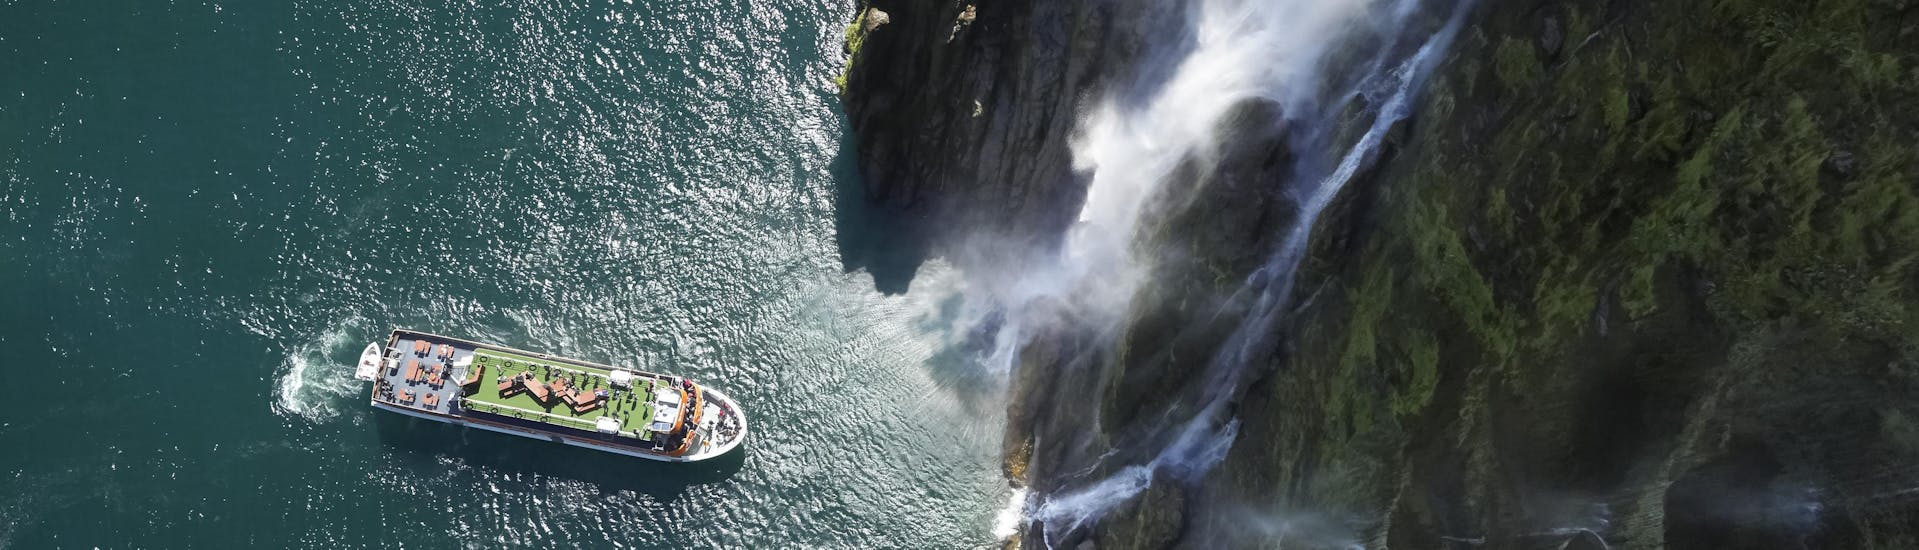 Bootstour - Milford Sound Fjord mit Wildtierbeobachtung & Sightseeing.